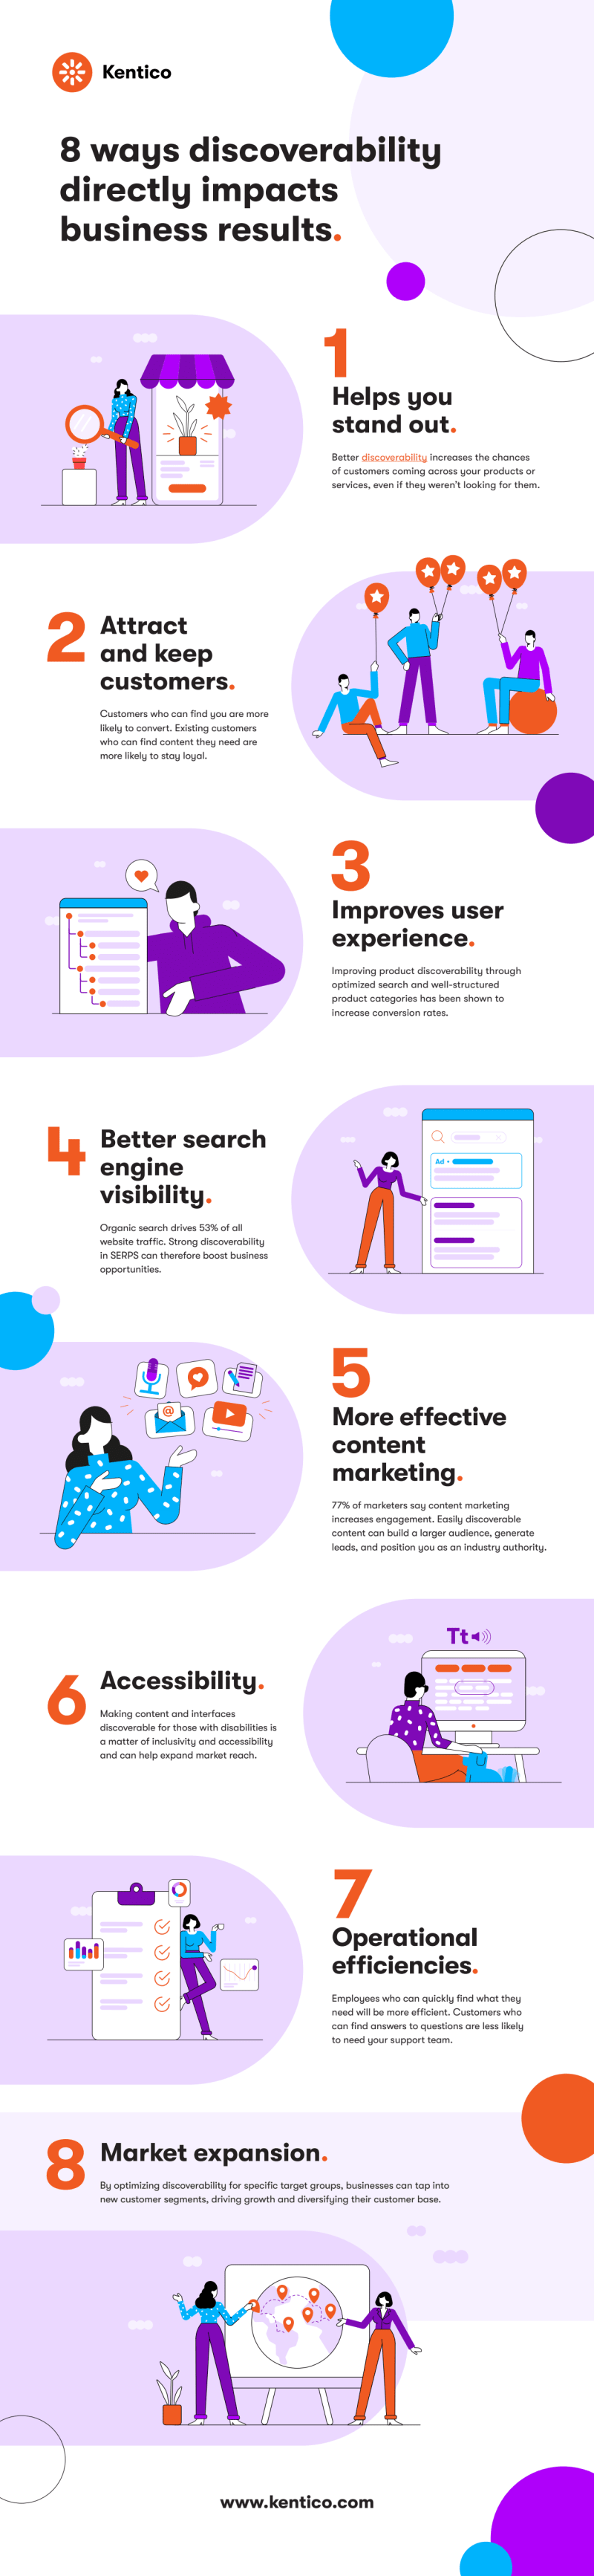 8 ways discoverablity directly impacts business results infographic